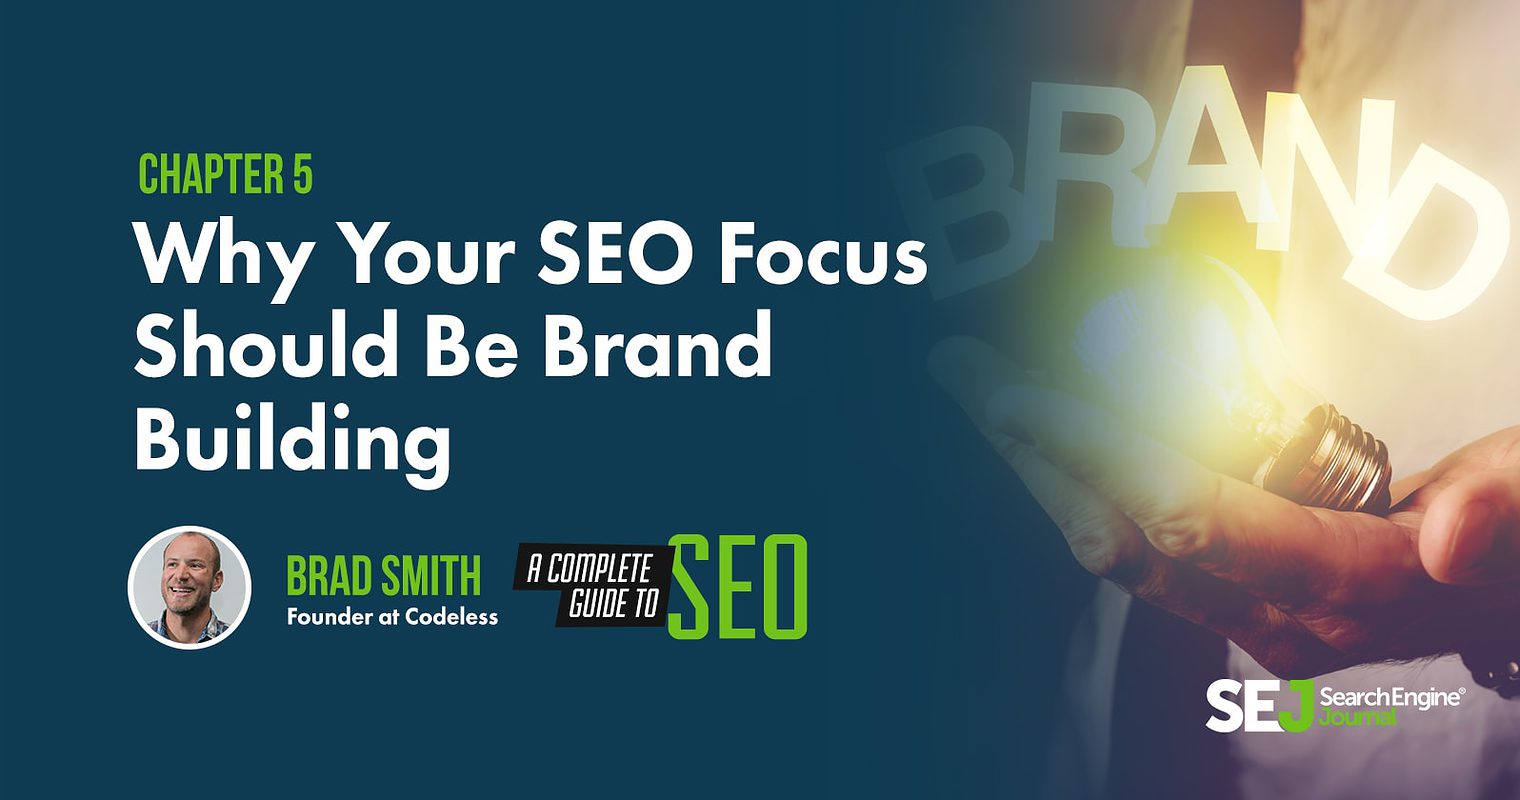 Why Your SEO Focus Should Be Brand Building